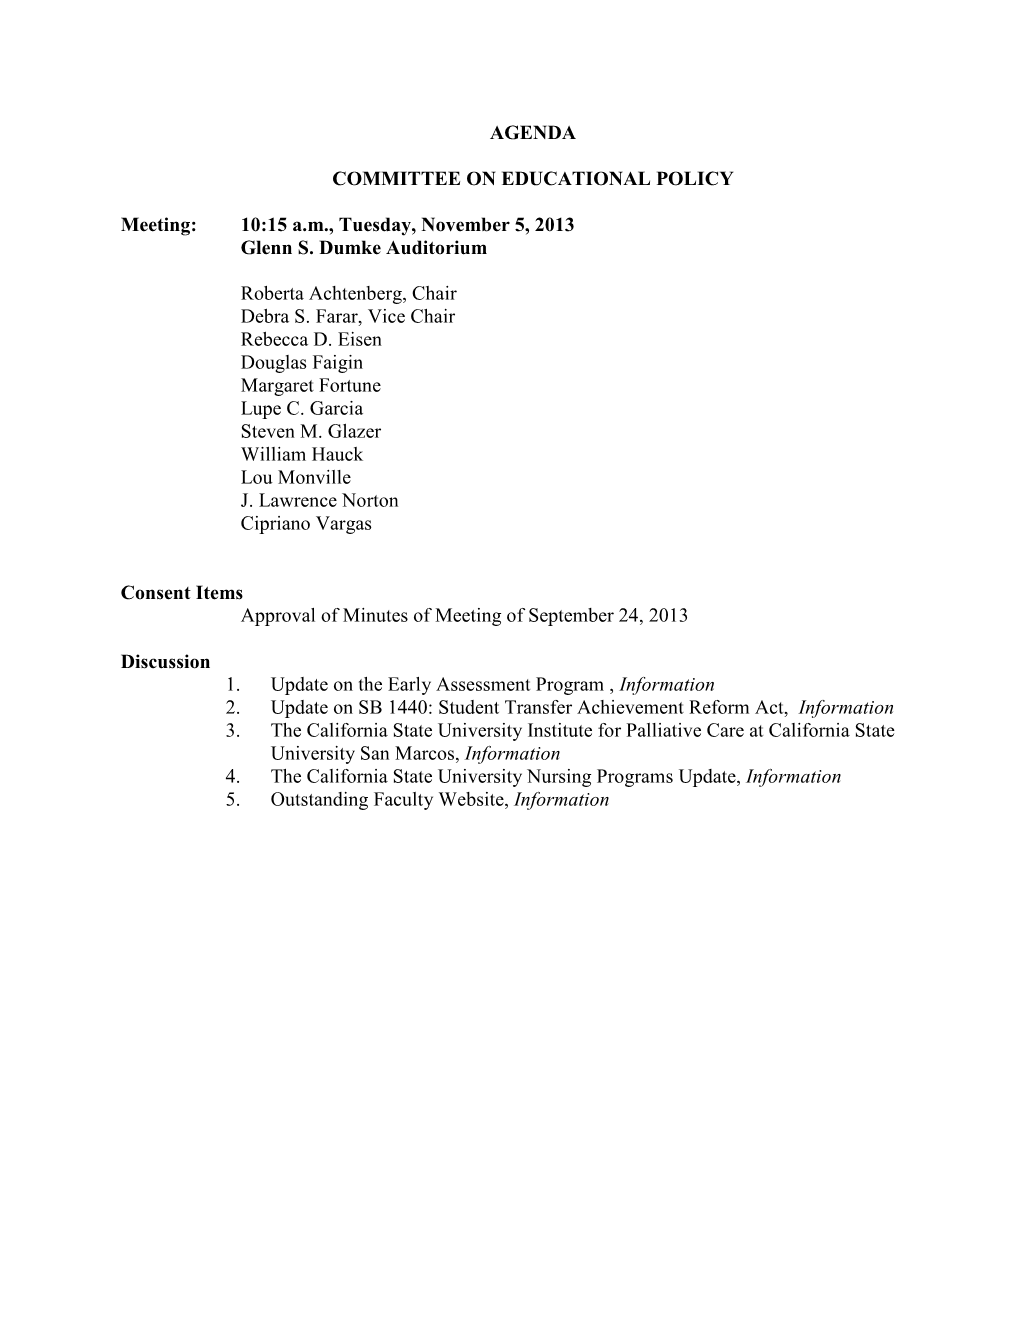 AGENDA COMMITTEE on EDUCATIONAL POLICY Meeting